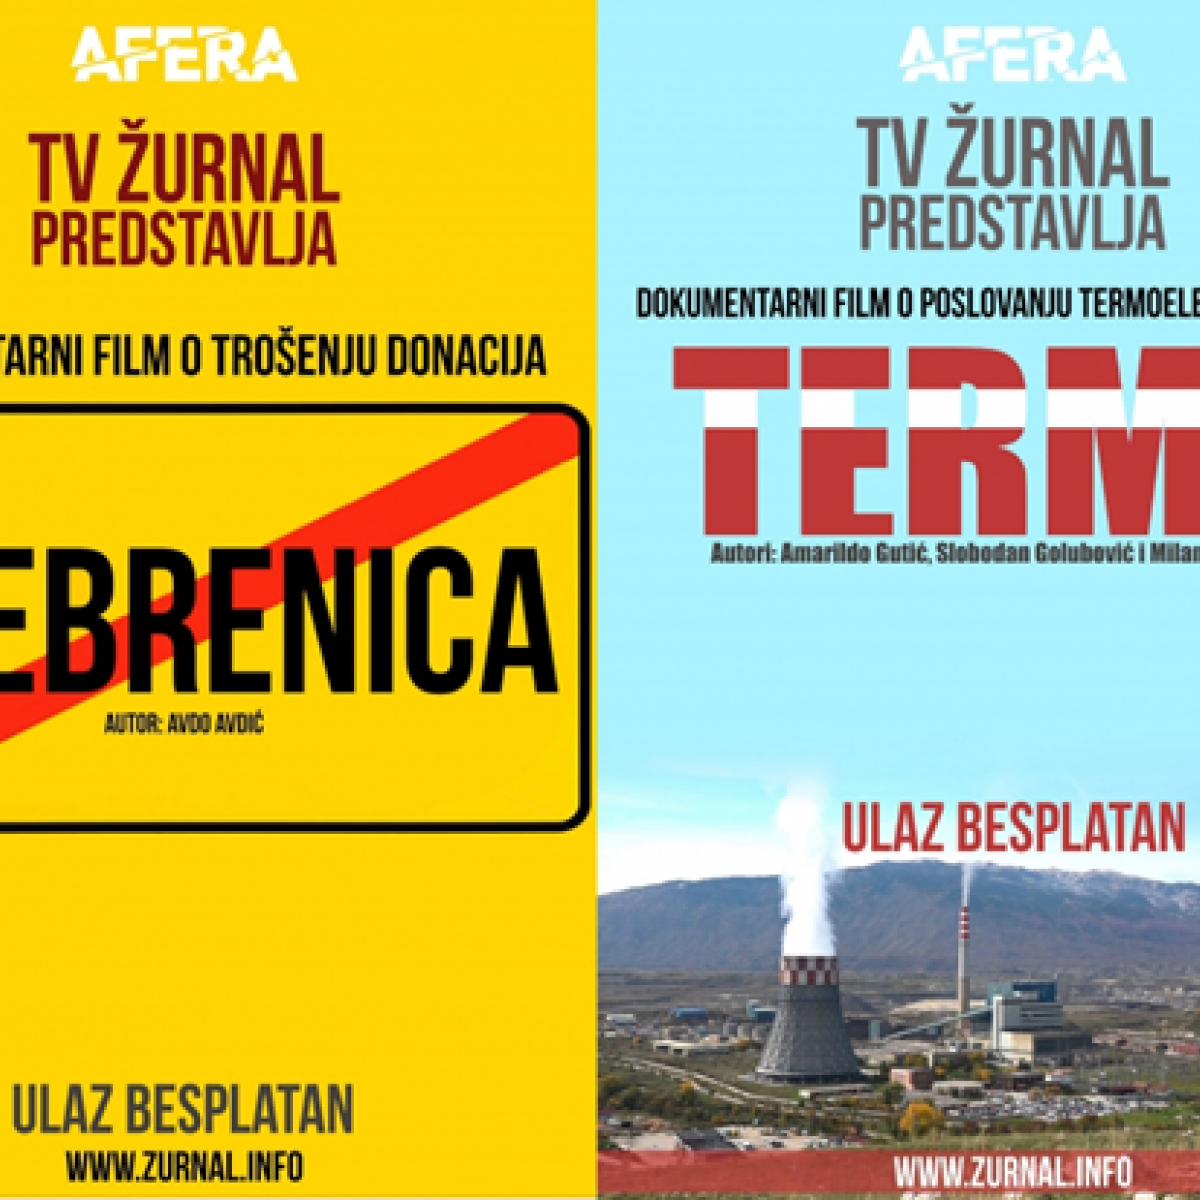 Zurnal’s ‘TV Affair’ cover page for documentaries uncovering corruption.